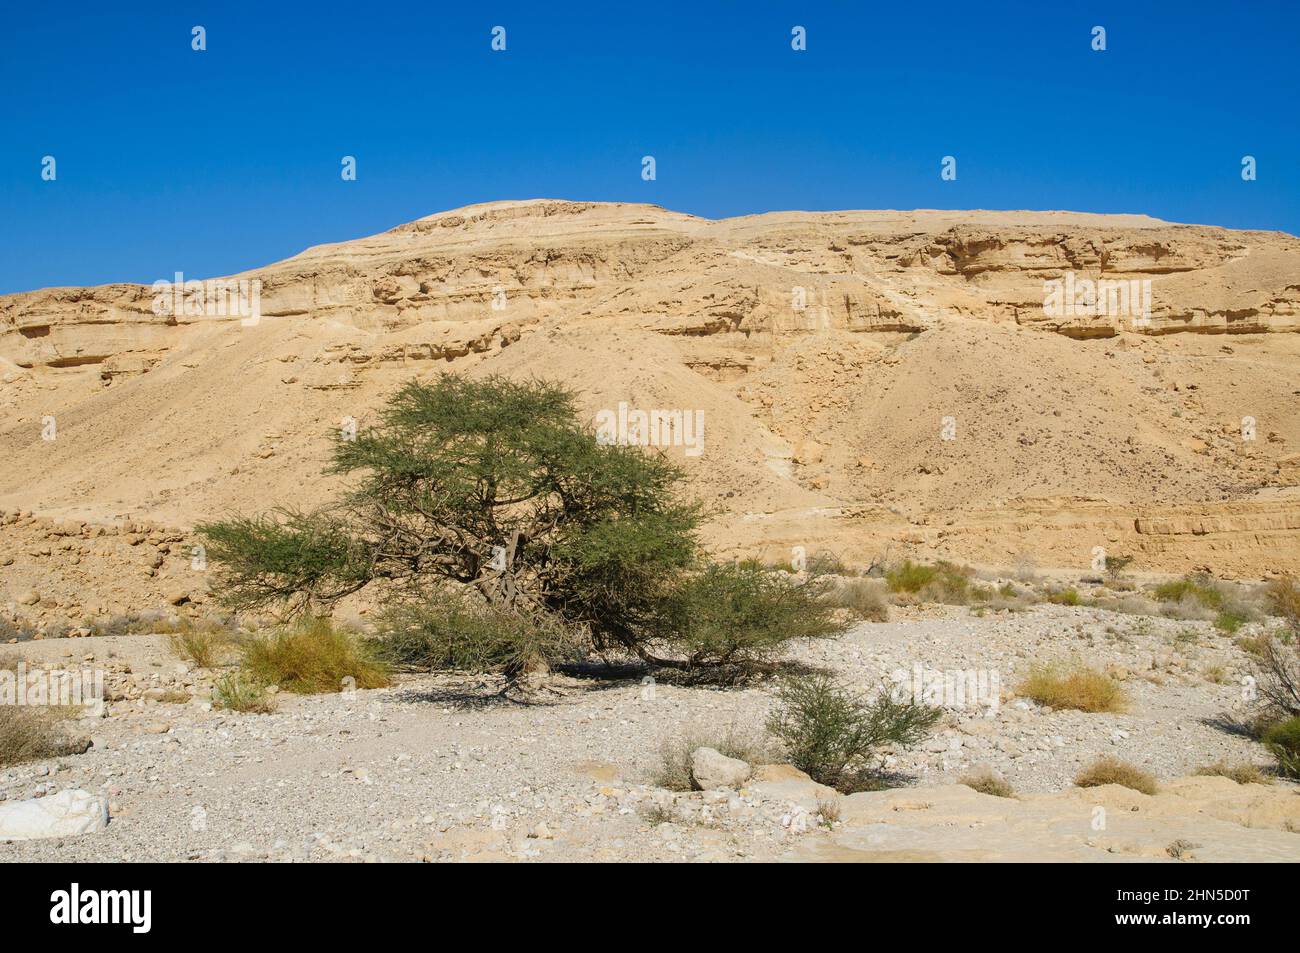 Acacia raddiana is a short desert tree with an impressive umbrella shape: a single non-branched trunk, which at a certain height (1-3 meters) suddenly Stock Photo